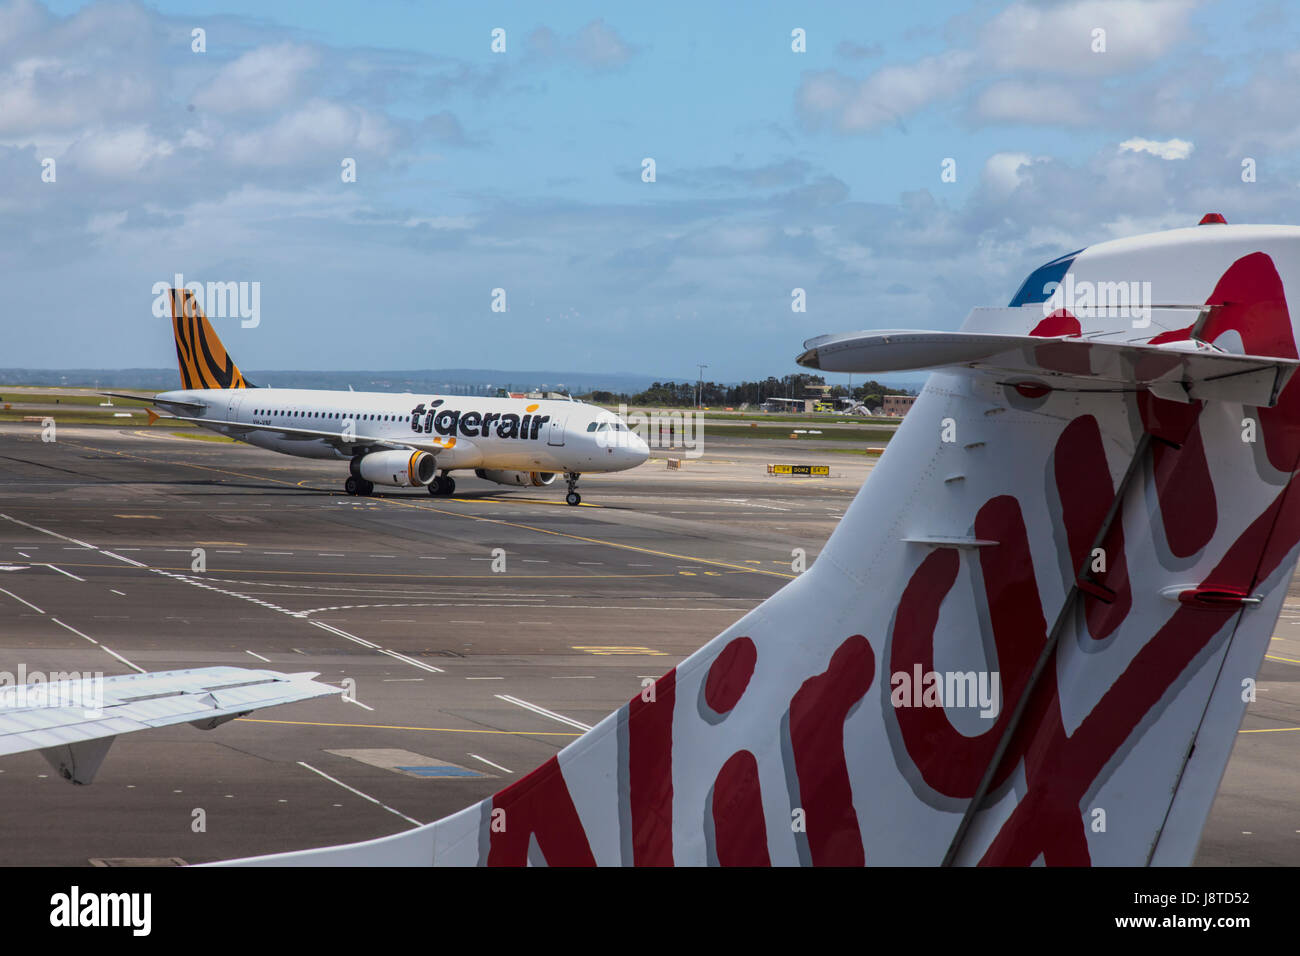 Tigerair jet taxiing at Hobart airport framed by Virgin Australia airliner Stock Photo